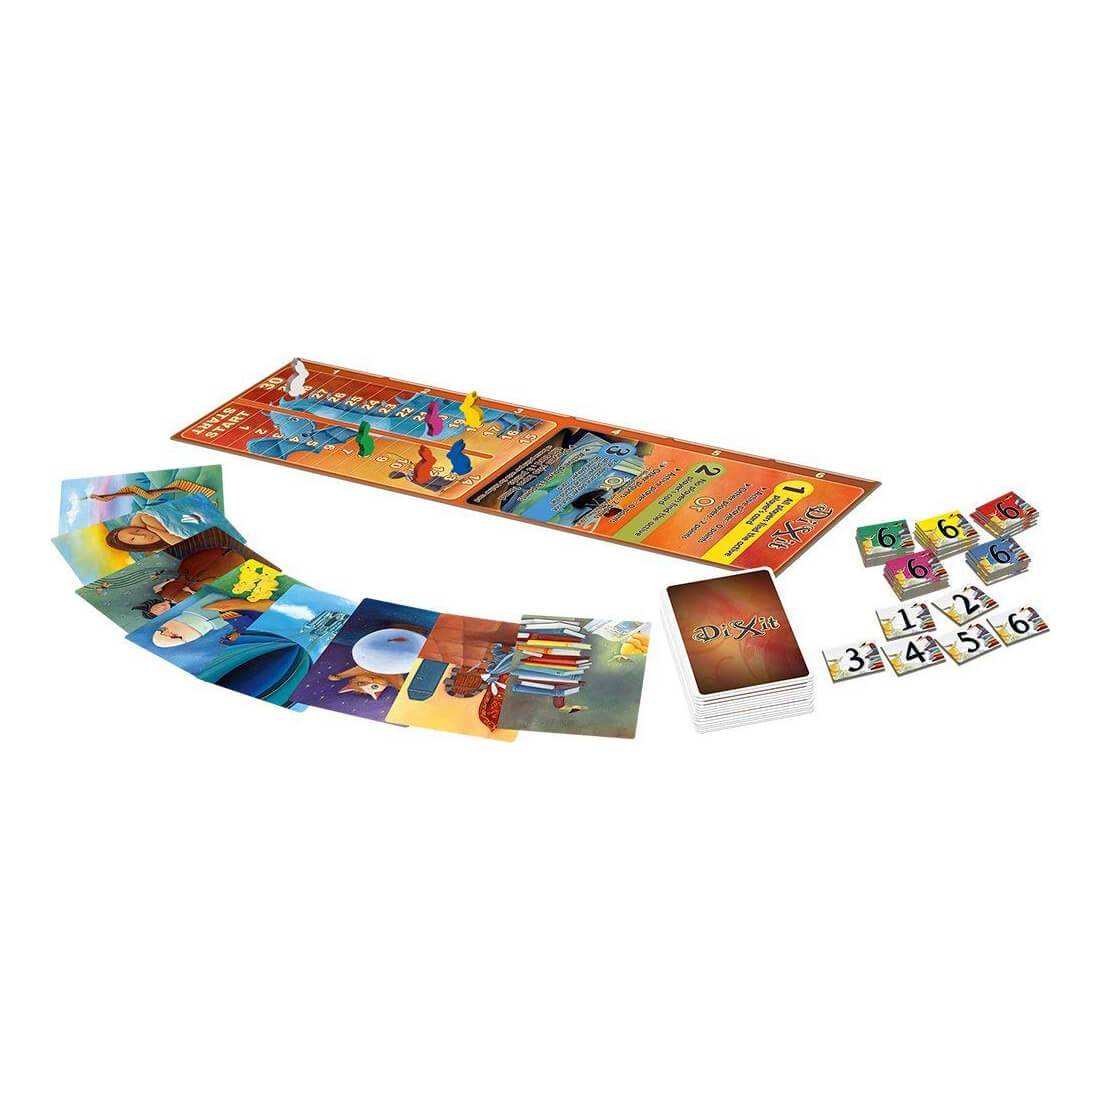 Dixit Game pieces and gameboard layout.